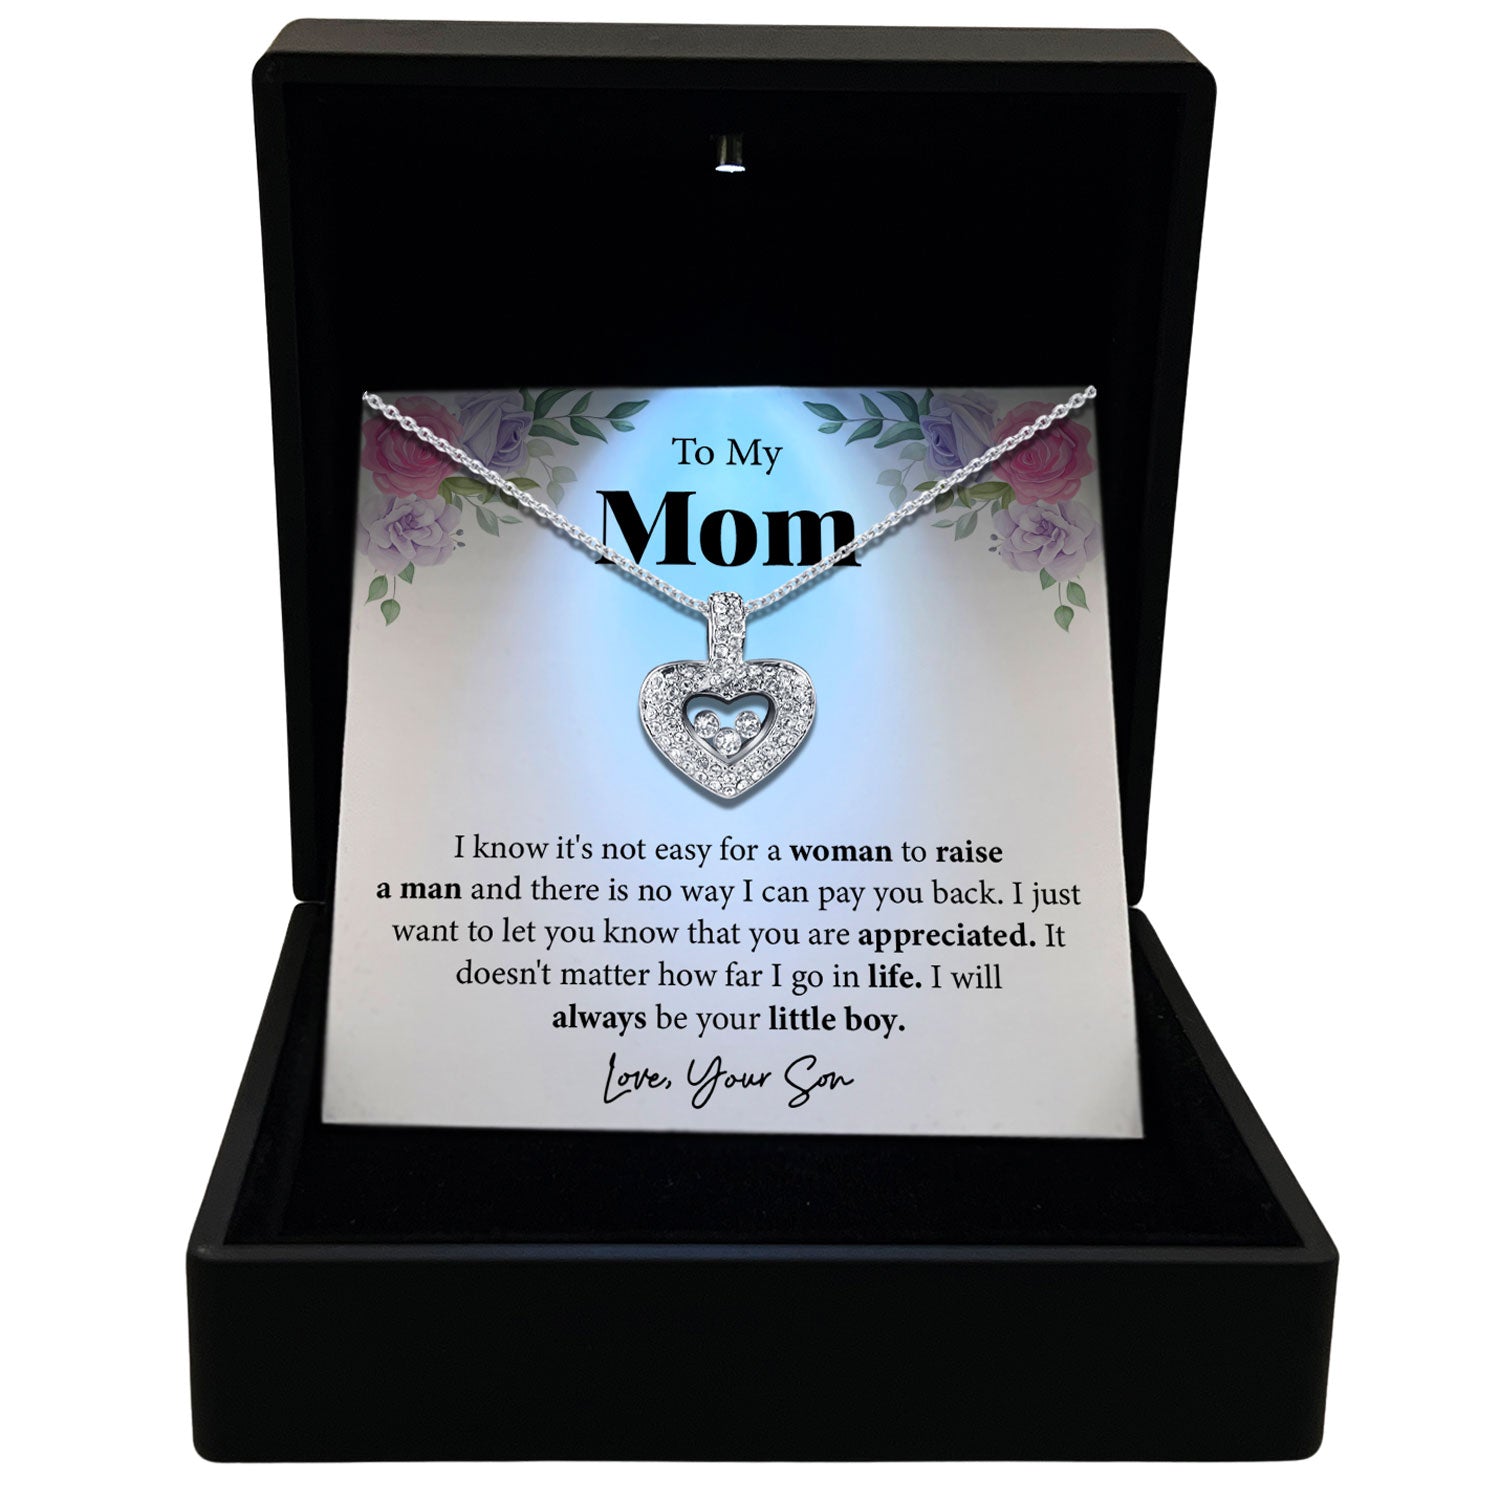 To My Mom - Love, Your Son - Tryndi Floating Heart Necklace